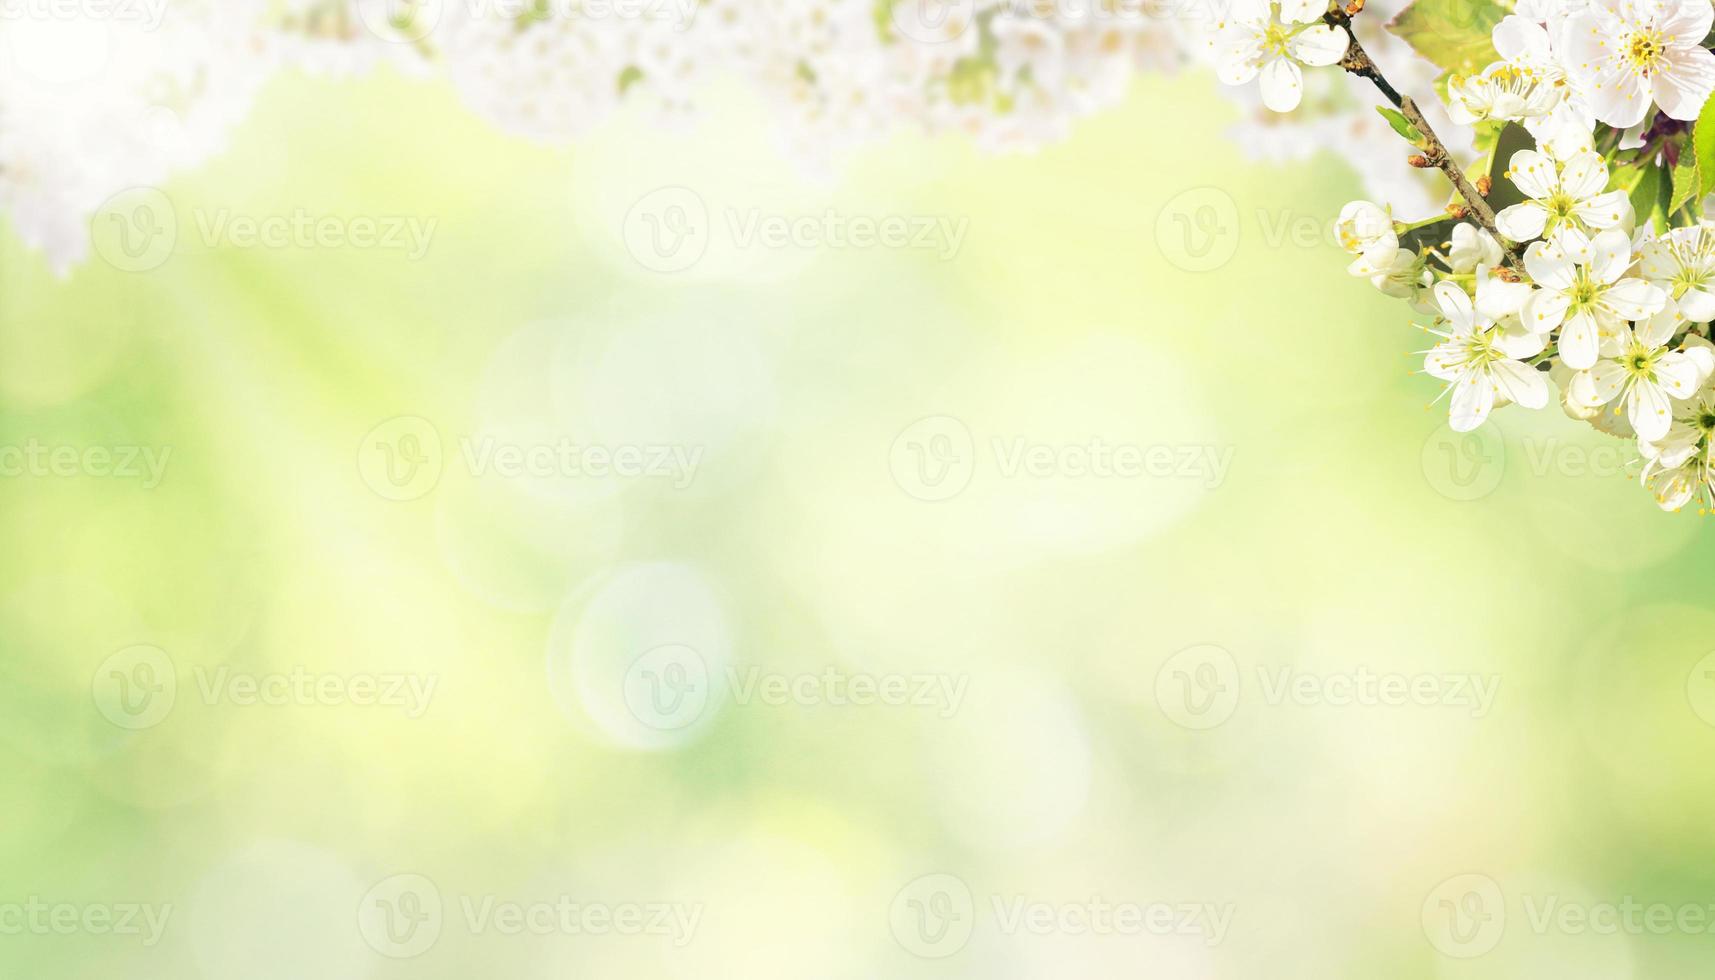 Beautiful nature view of spring flowering trees on blurred background. photo